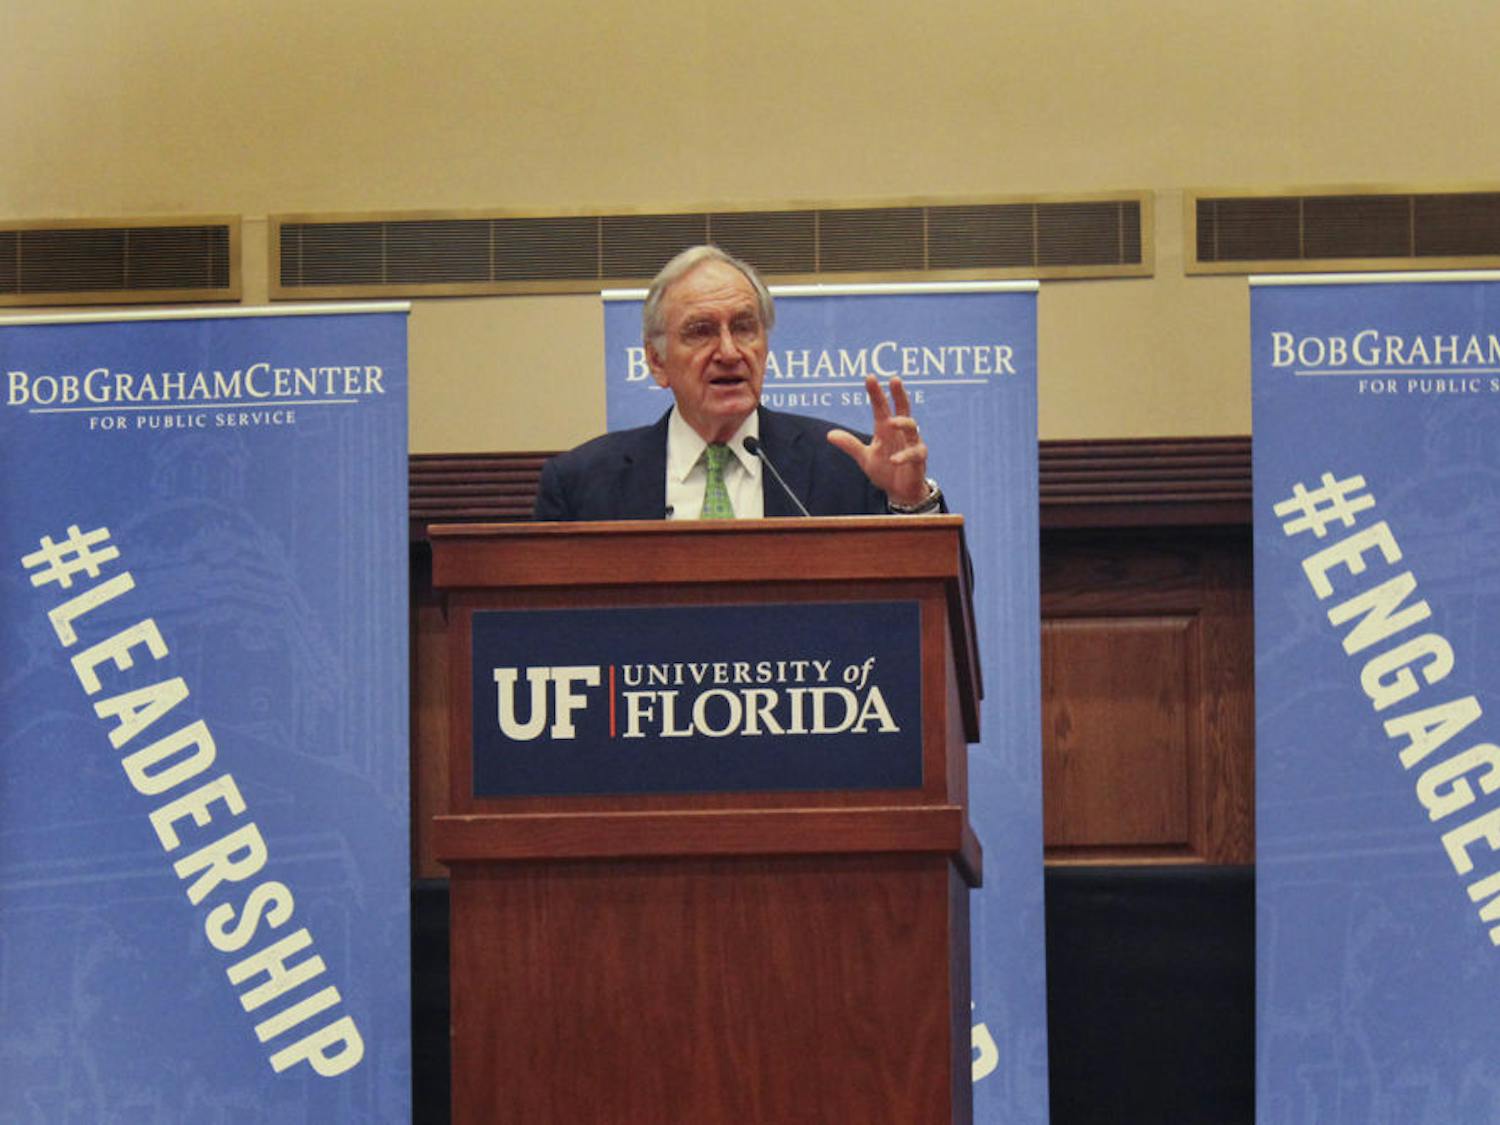 Tom Harkin speaks in the Reitz Union Grand Ballroom on Oct. 20, 2015. He talked about the impacts of the Americans with Disabilities Act, saying it “opened up the Court’s doors” to people with disabilities.